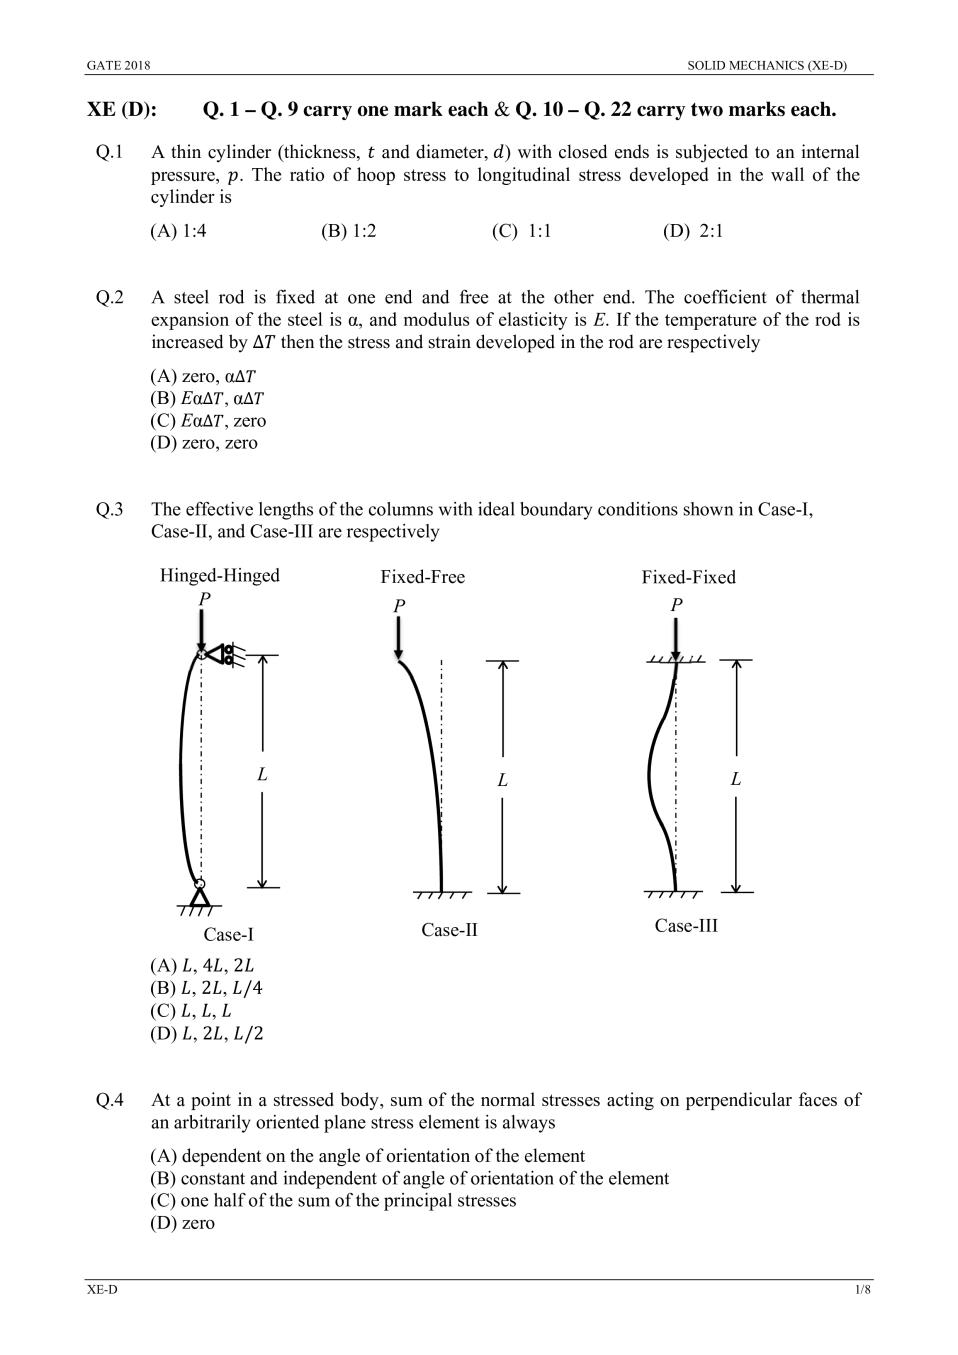 GATE 2018 SOLID MECHANICS (XE-D) Question Paper with Answer - Page 1